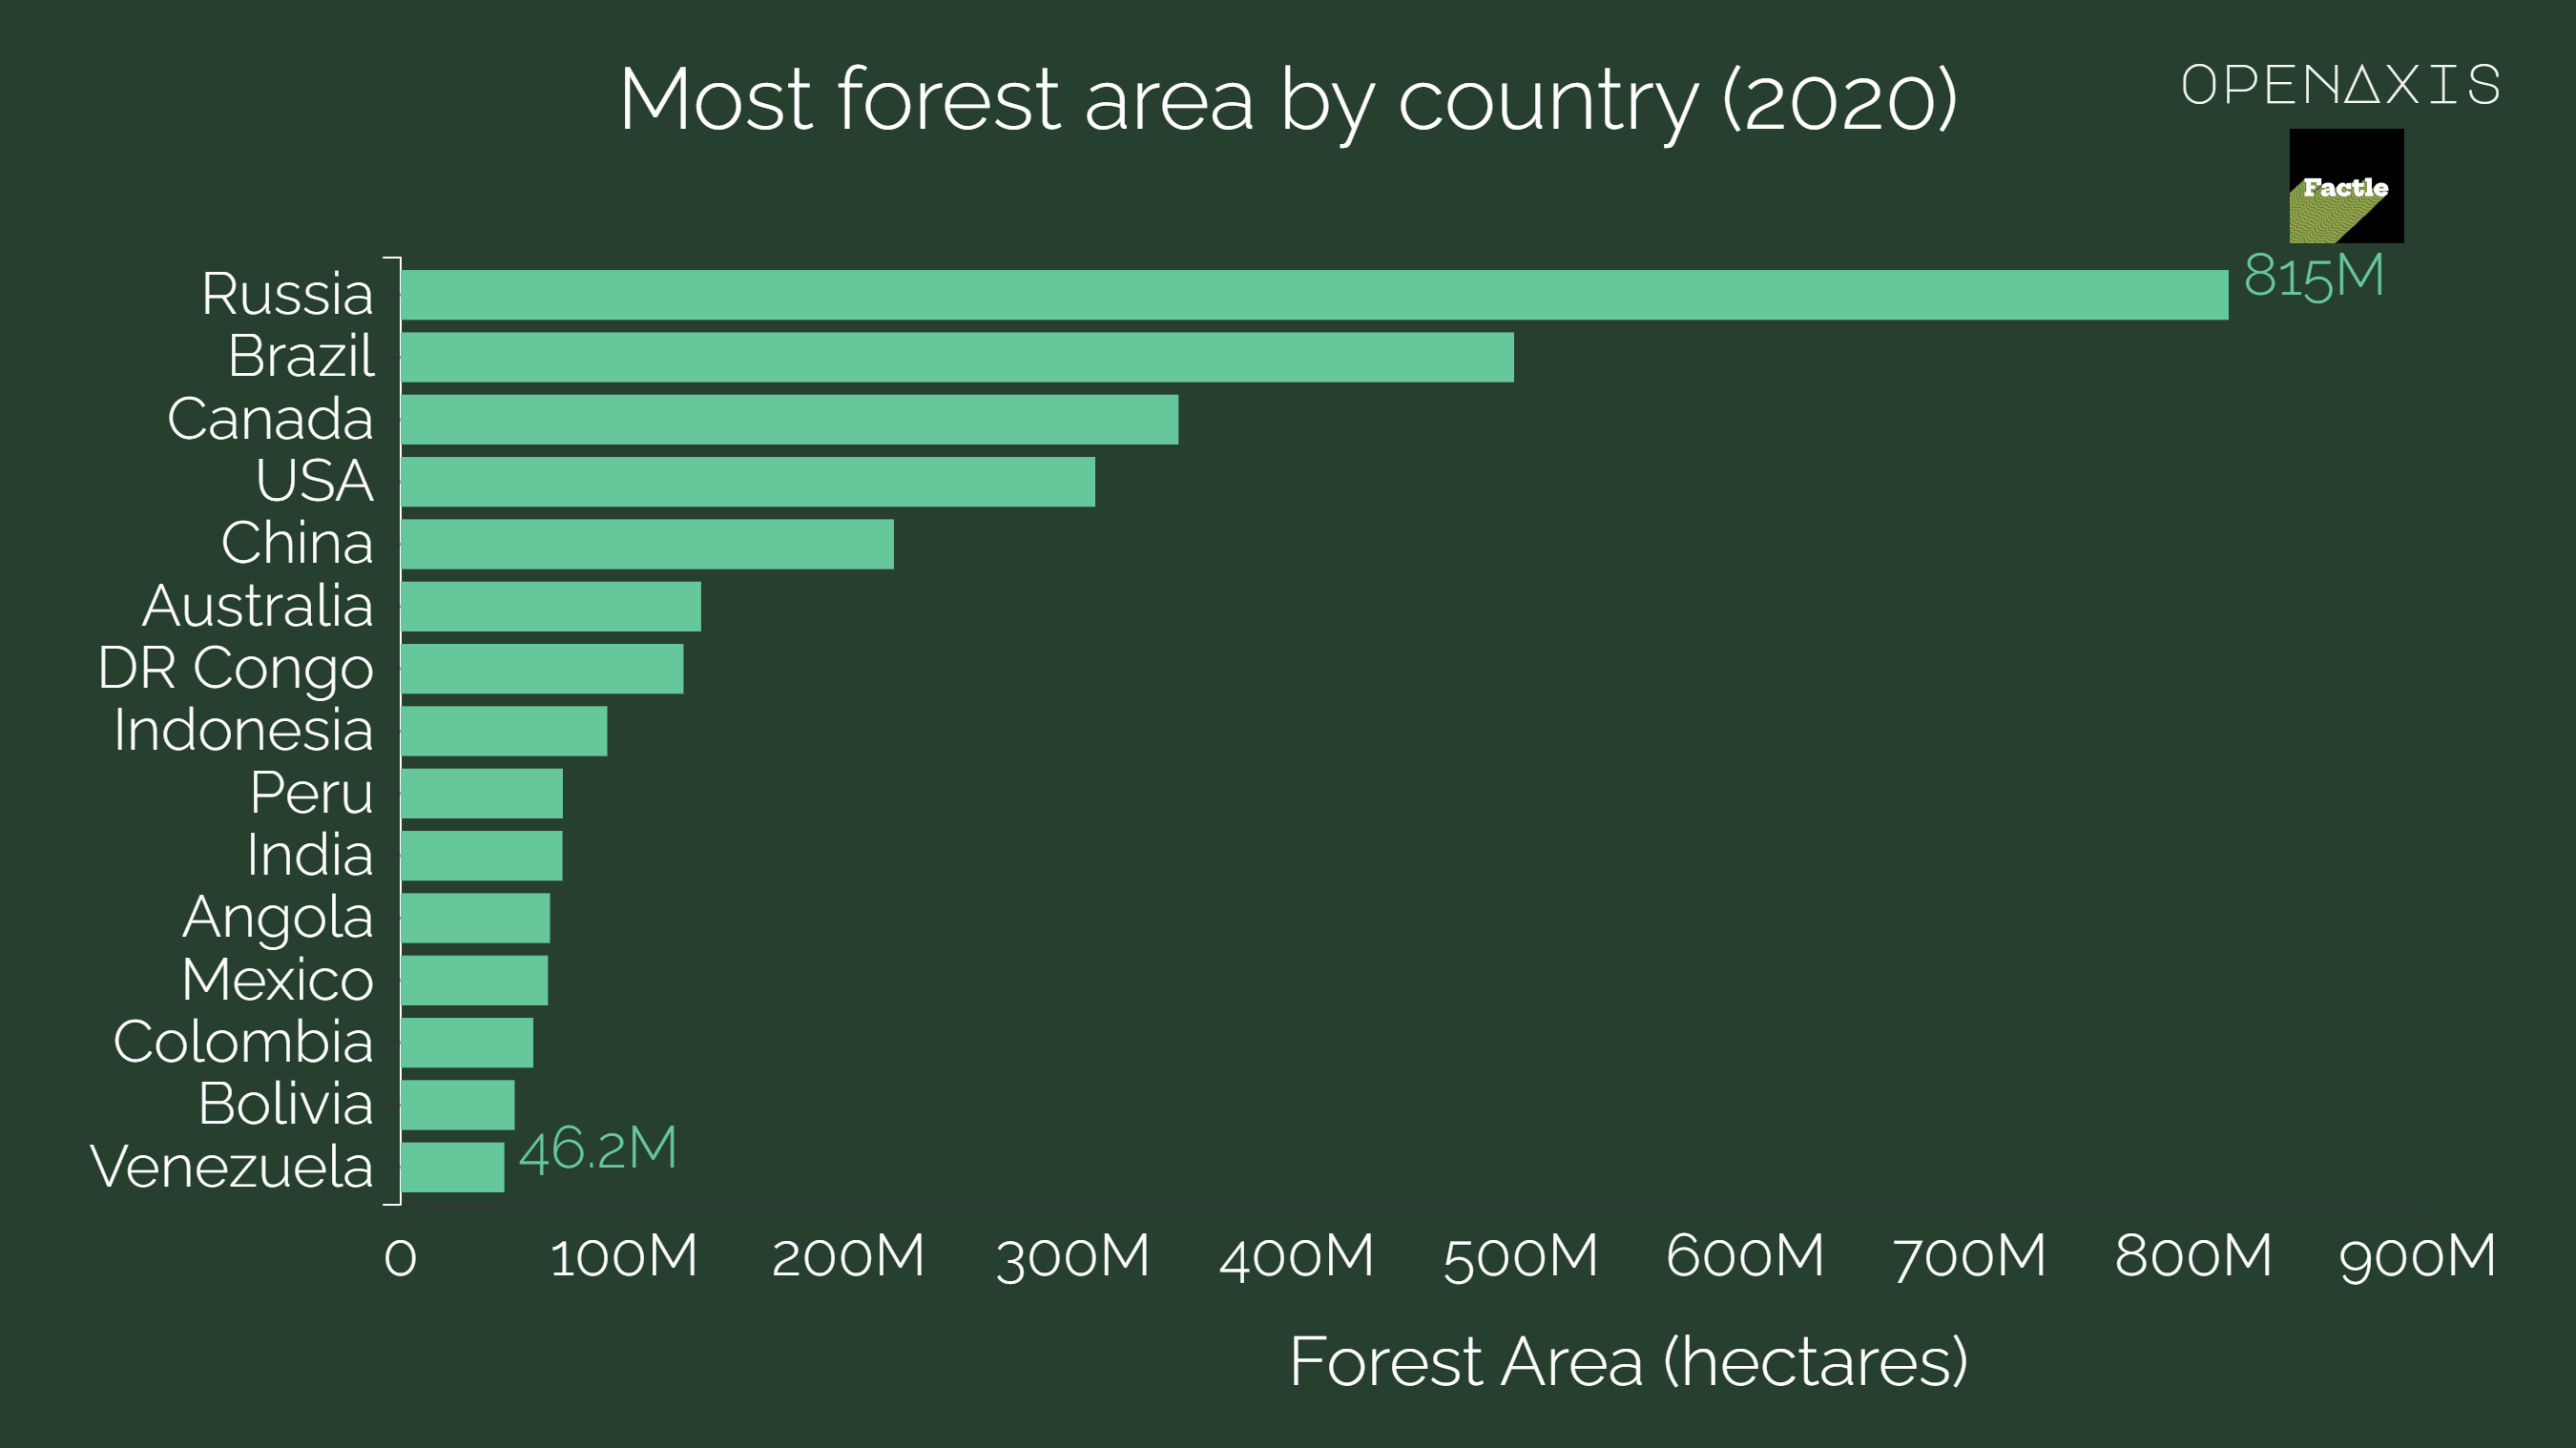 <p>Russia is home to the largest area of forest – 815 million hectares.</p><p><br /></p><p>Brazil, the United States, Canada, China, Australia, and the Democratic Republic of Congo also have a largest forest area – more than 100 million hectares each.</p><p><br /></p><p>Russia is home to one-fifth of global forest area. Brazil is the only other country with more than 10% of global forest cover.</p><p><br /></p><p><span data-index="0" data-denotation-char data-id="0" data-value="&lt;a href=&quot;/search?q=%23forests&quot; target=_self&gt;#forests" data-link="/search?q=%23forests">﻿<span contenteditable="false"><span></span><a href="/search?q=%23forests" target="_self">#forests</a></span>﻿</span></p><p><br /></p><p>Source: <a href="/data/3711" target="_blank">Food &amp; Agriculture Organization of the United Nations (FAO)</a></p><p><br /></p>